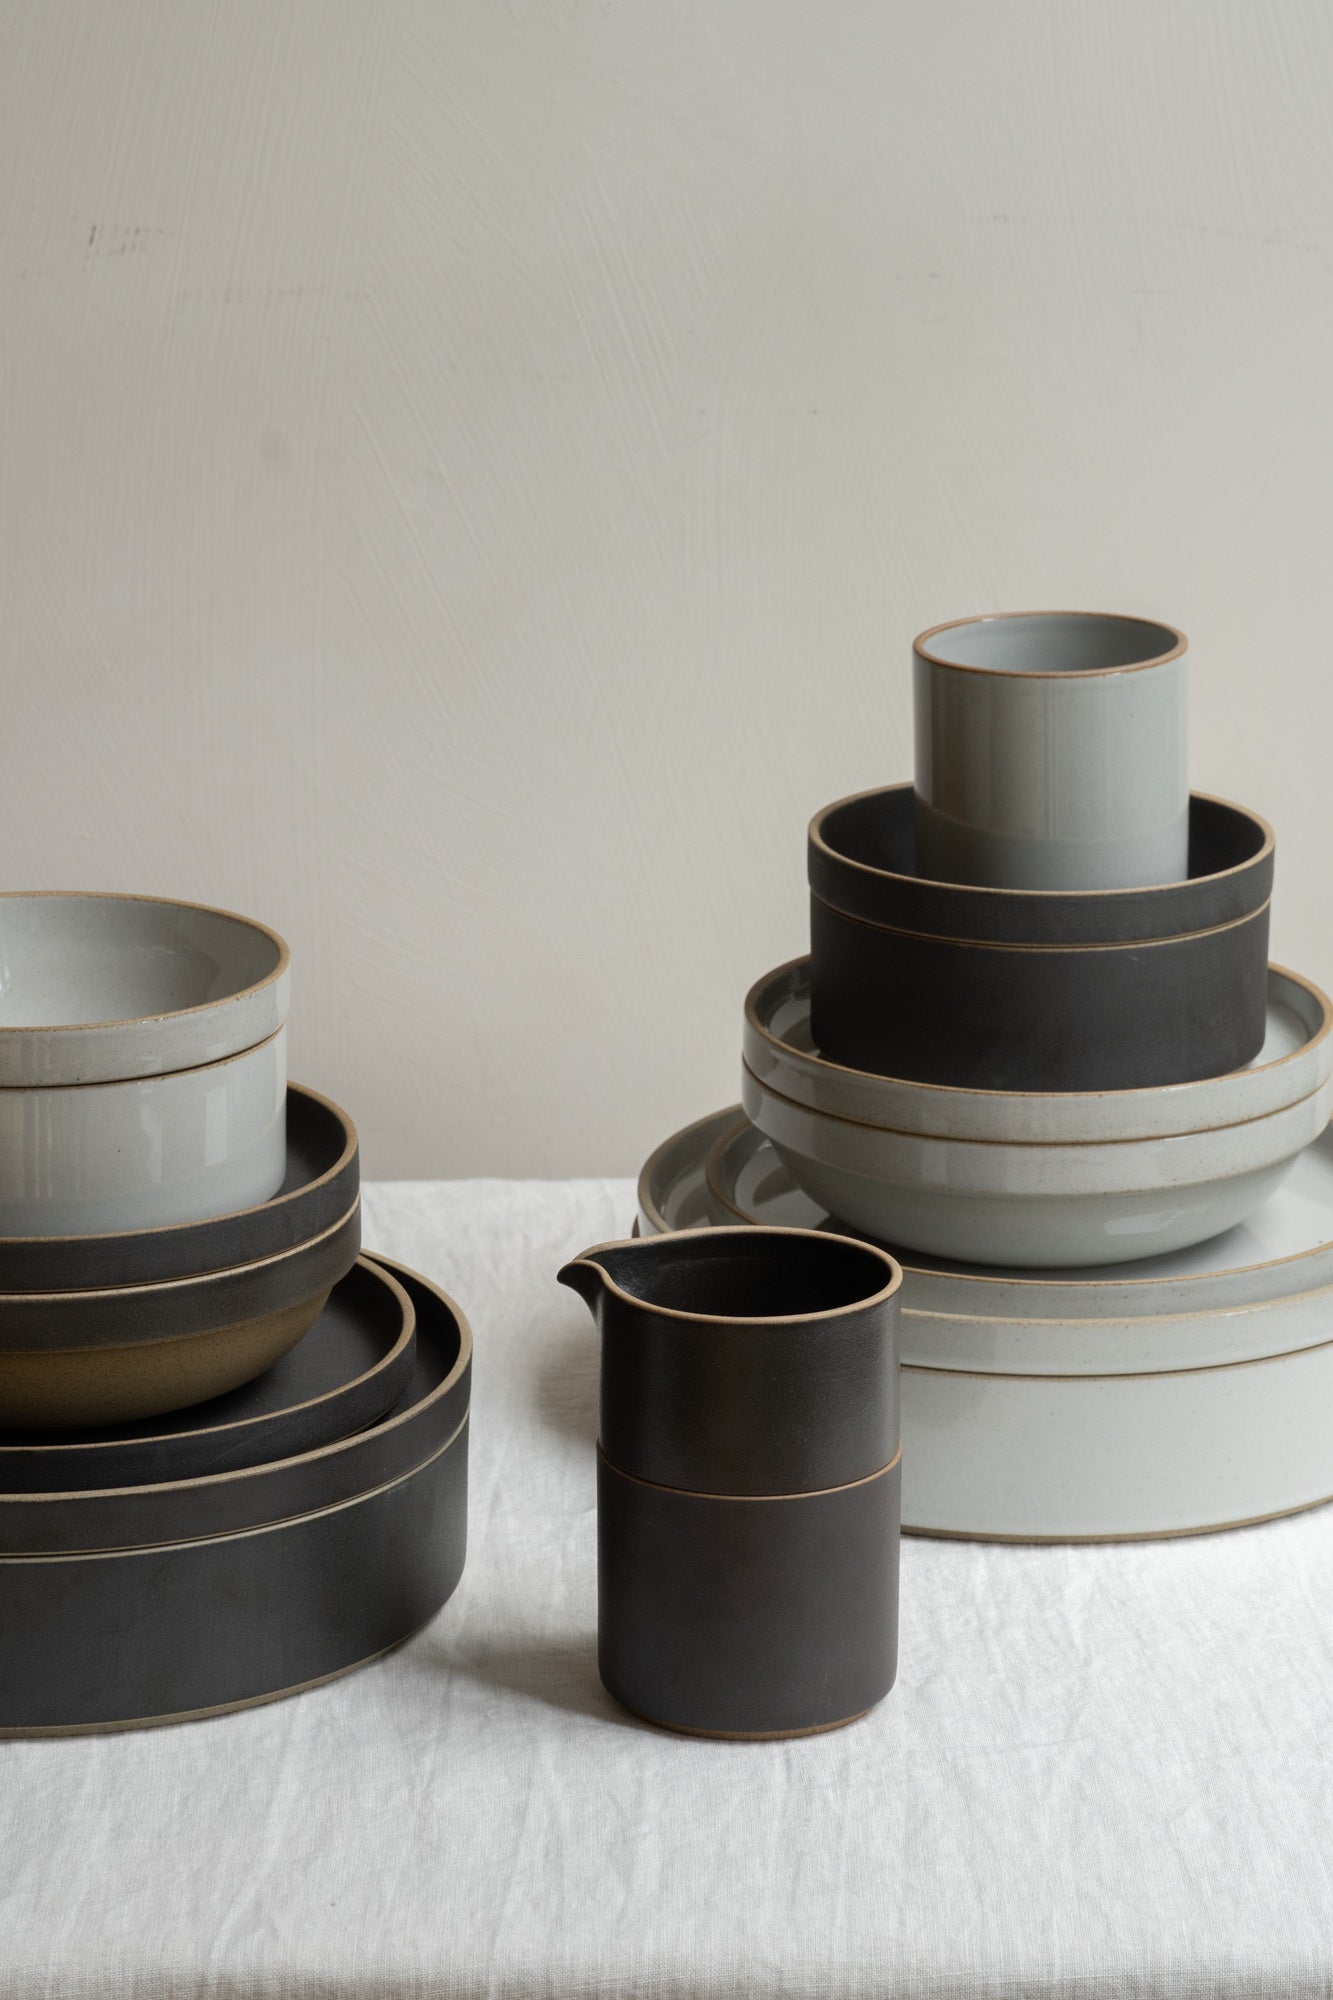 Hasami Porcelain tableware collection set in Grey and Black set on white linen table cloth.